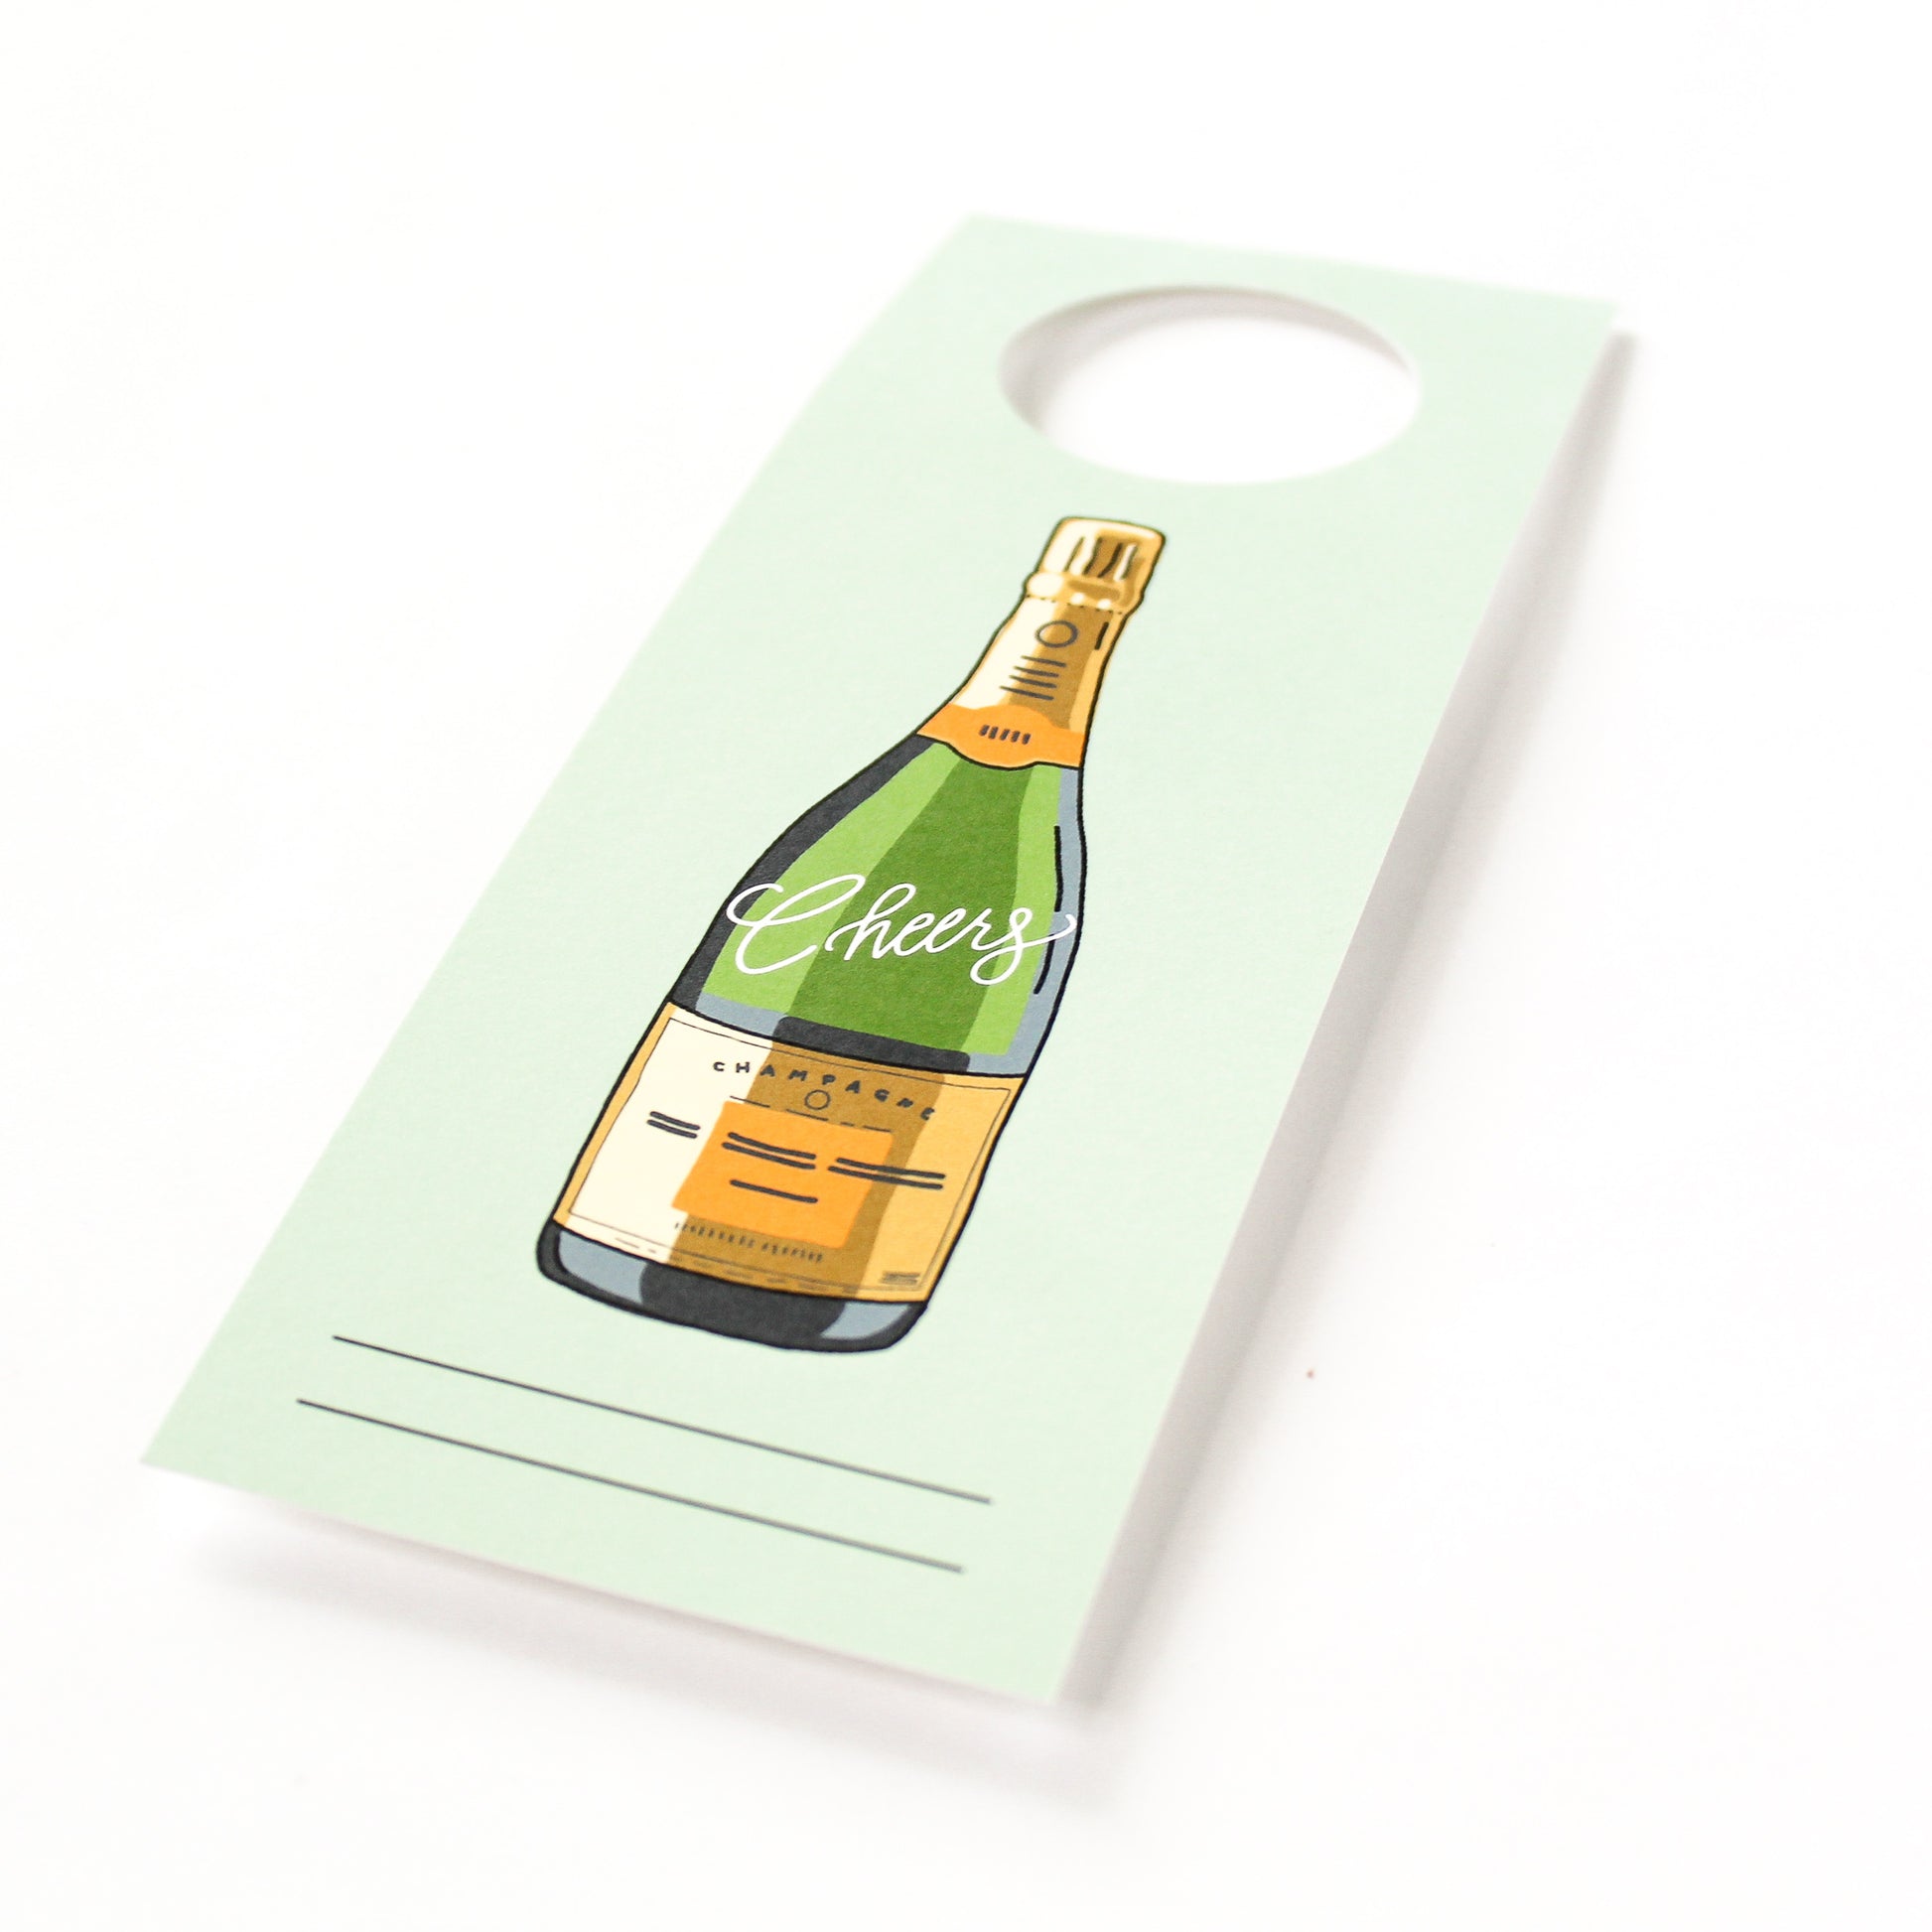 'Champagne Cheers!' Bottle Neck Gift Tags